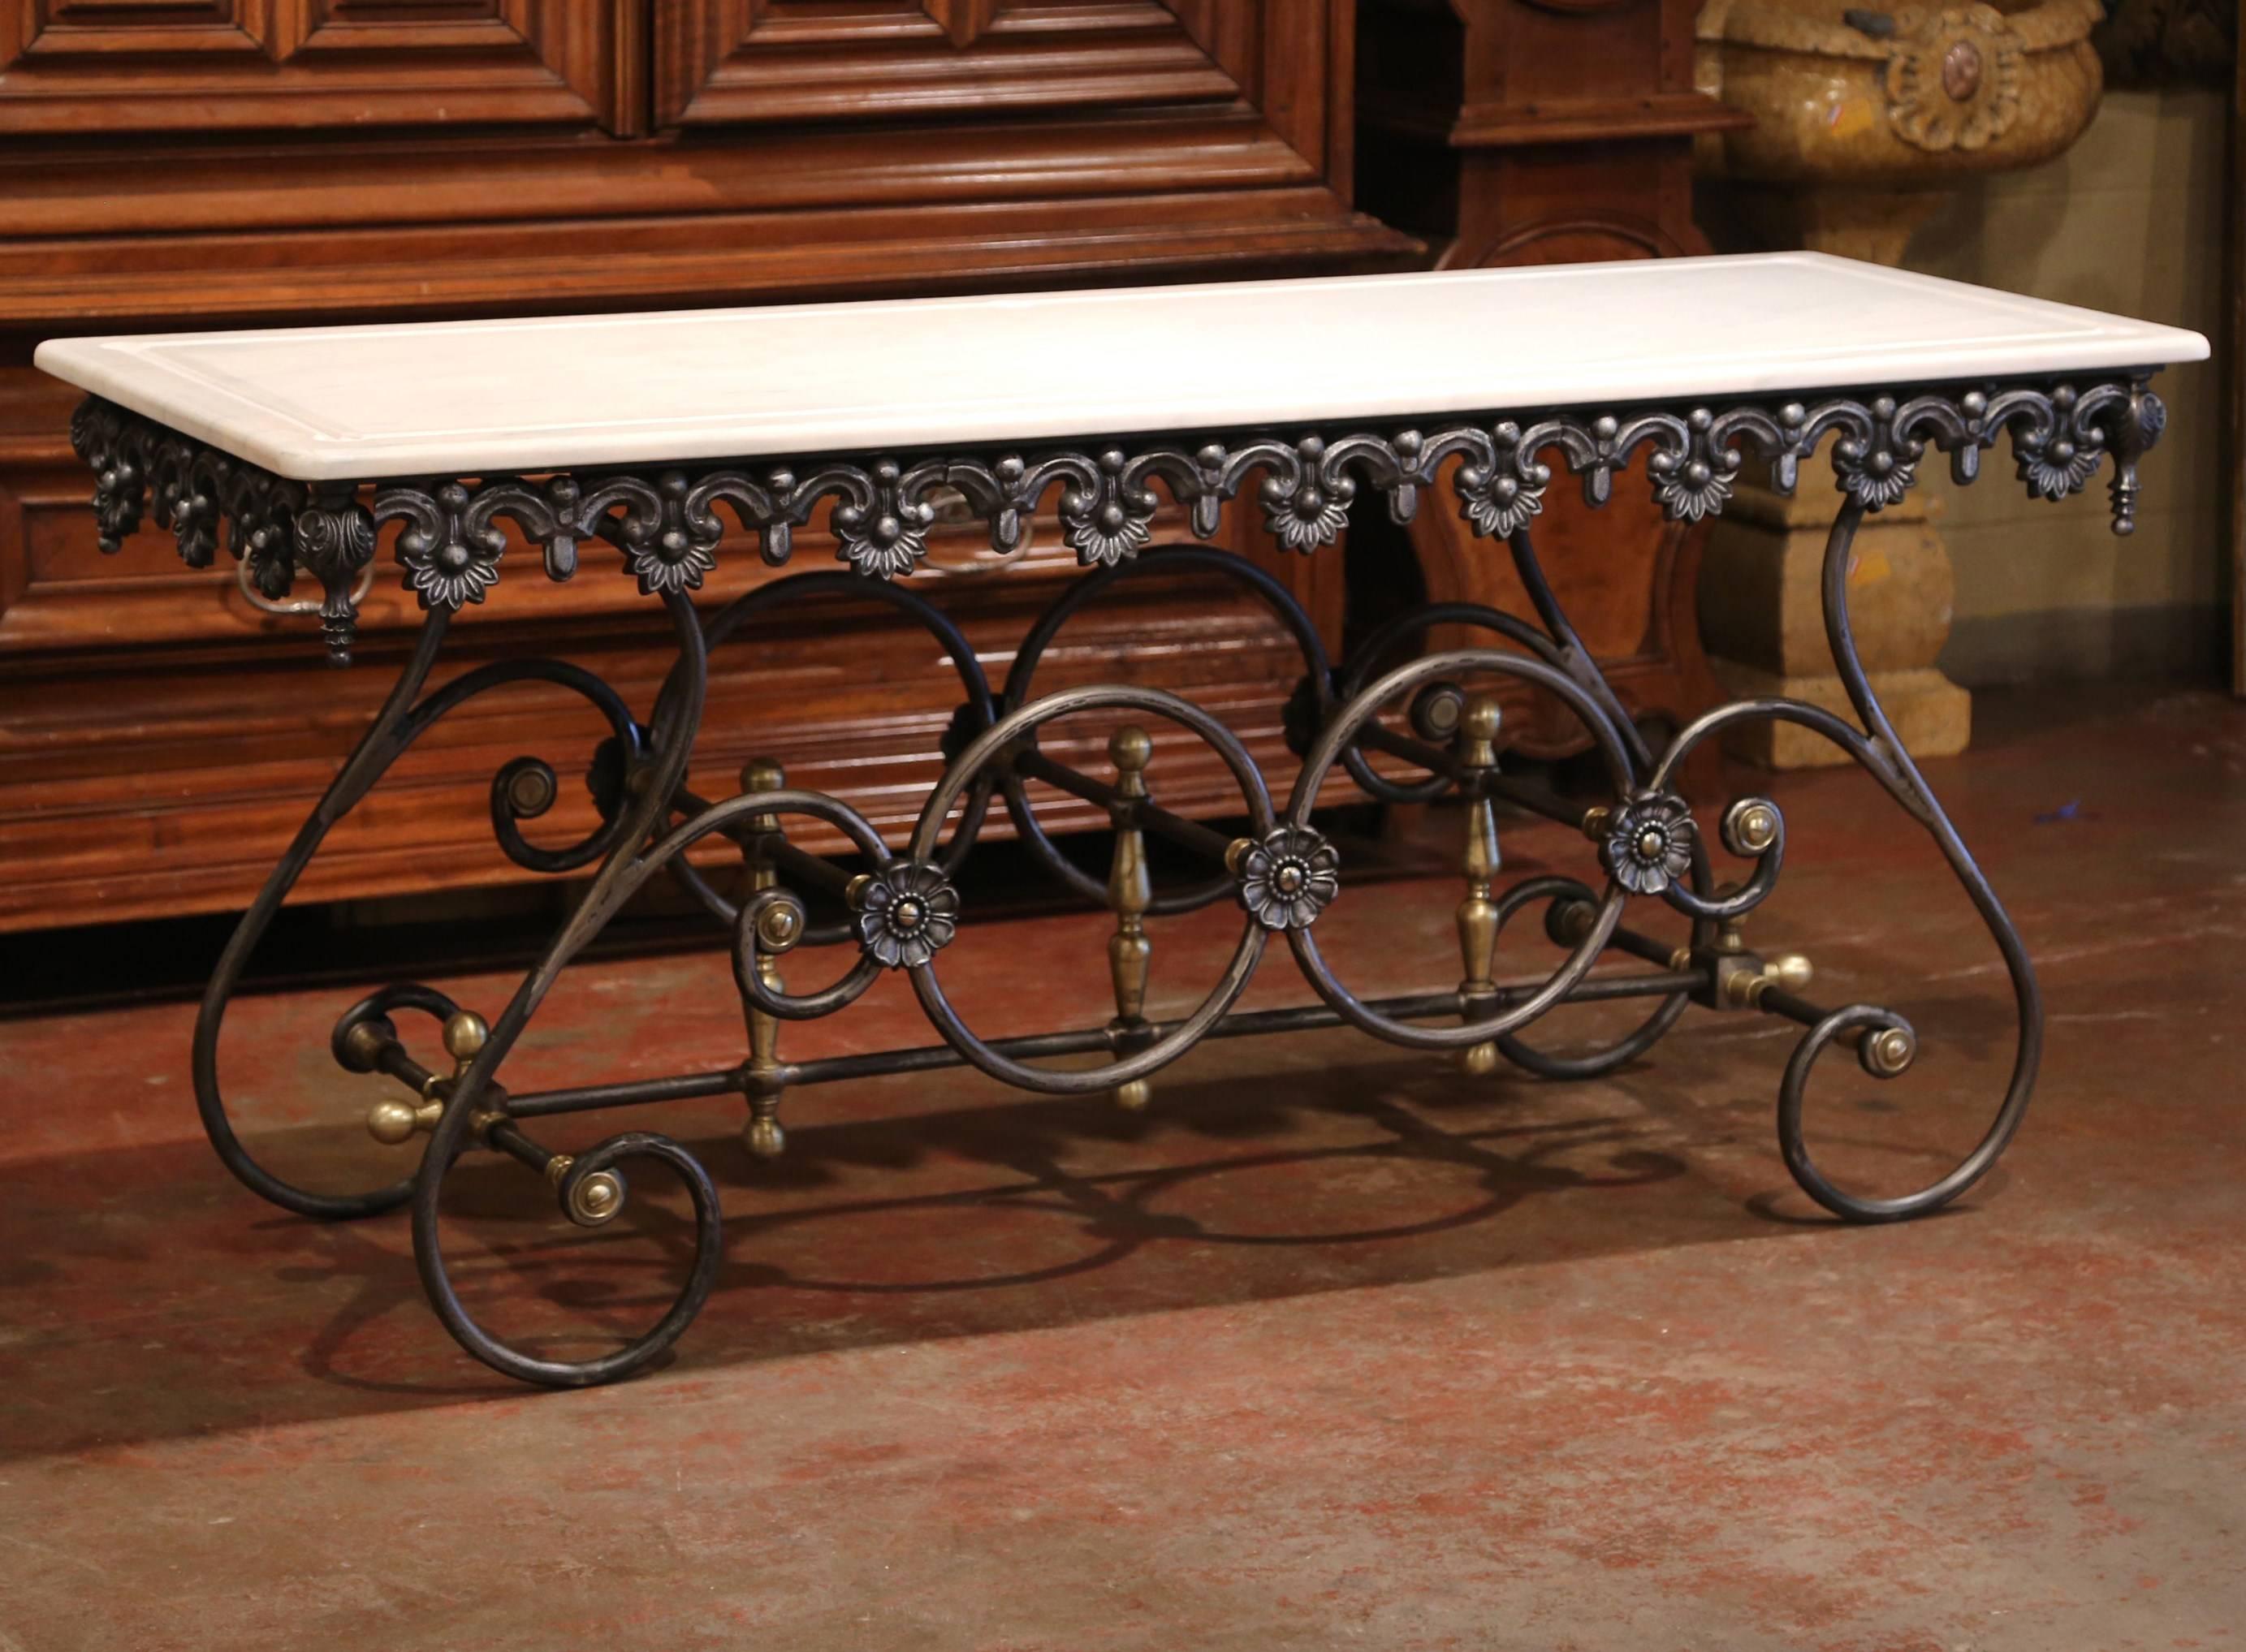 This large pastry table from France would add the ideal amount of surface space to any kitchen. The 